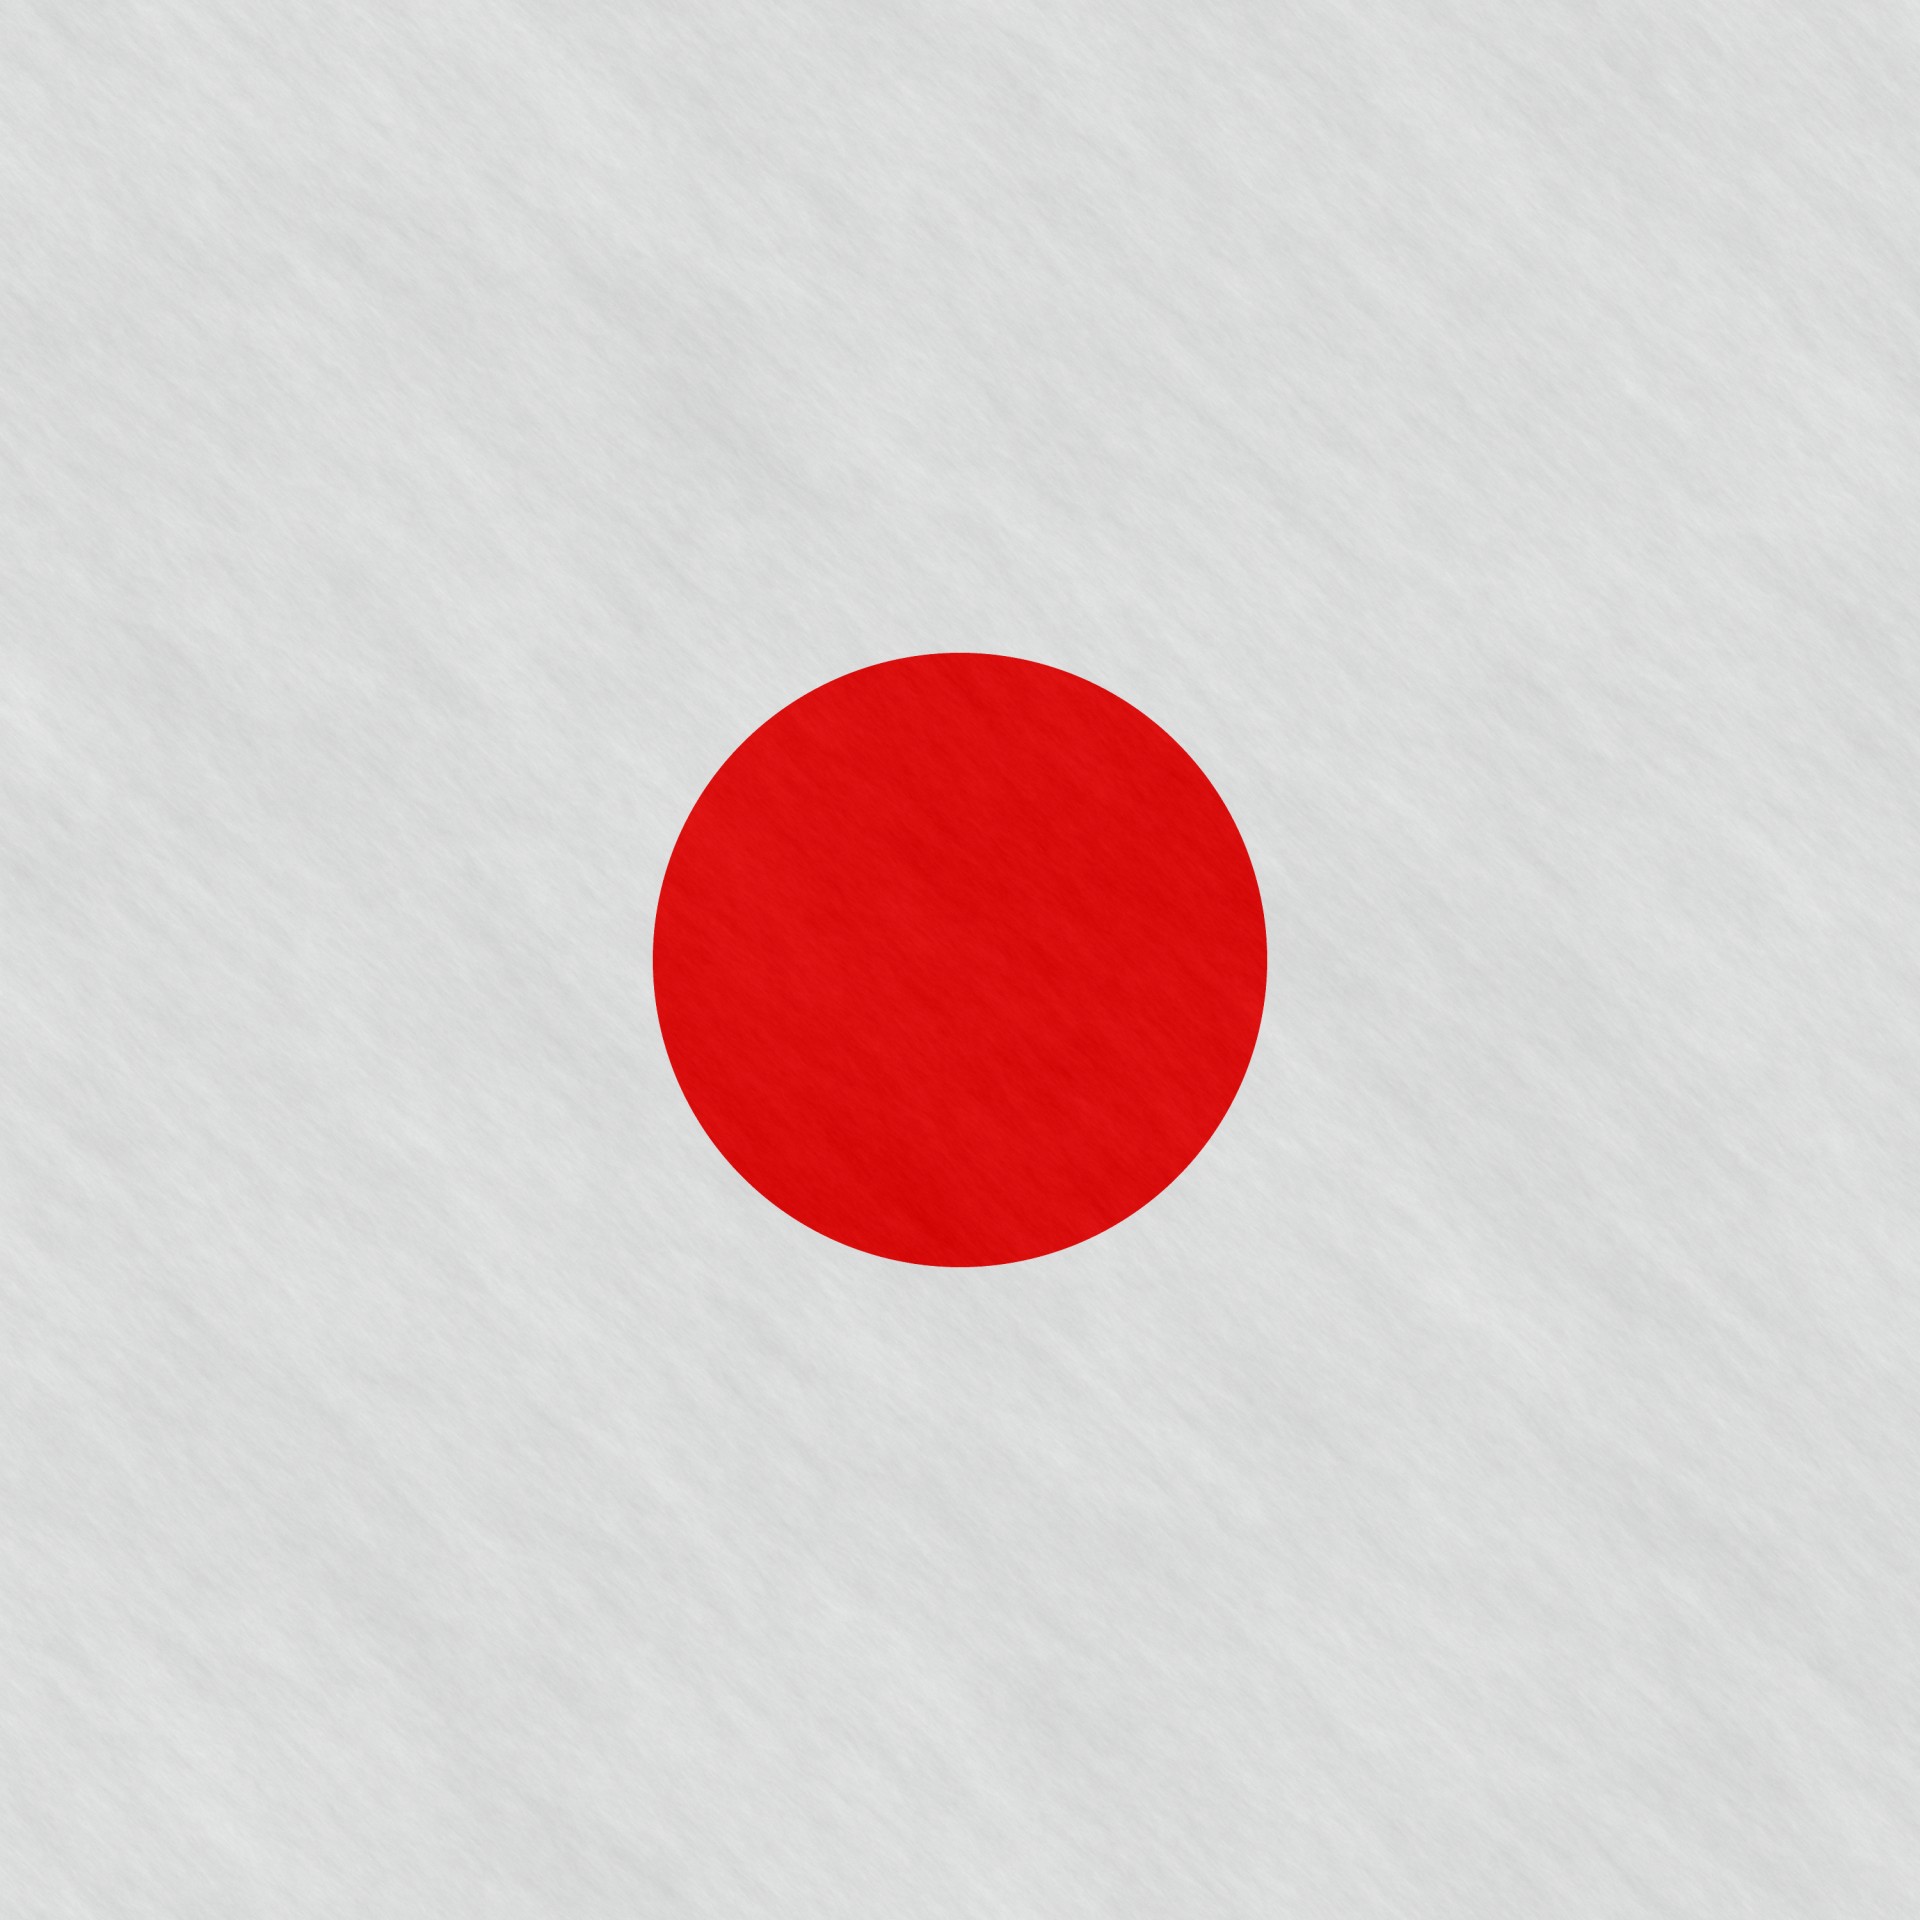 country japan flag free photo